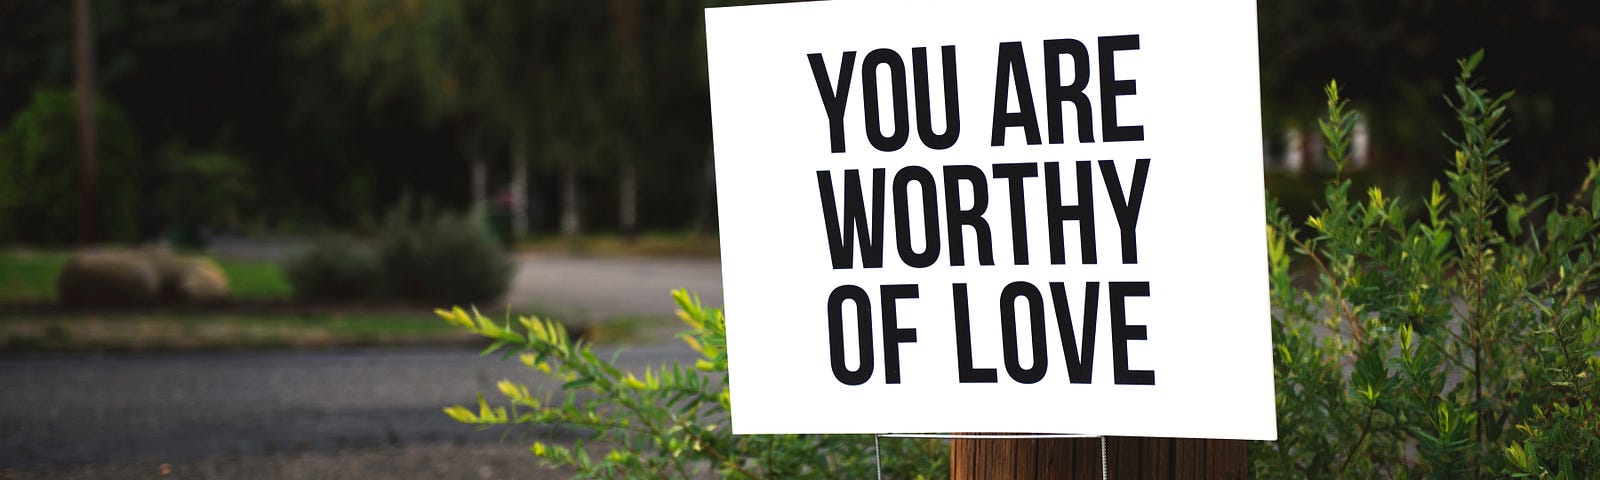 A white sign with the black letters that say “You are worthy of love”, in front of a tree with bushes.